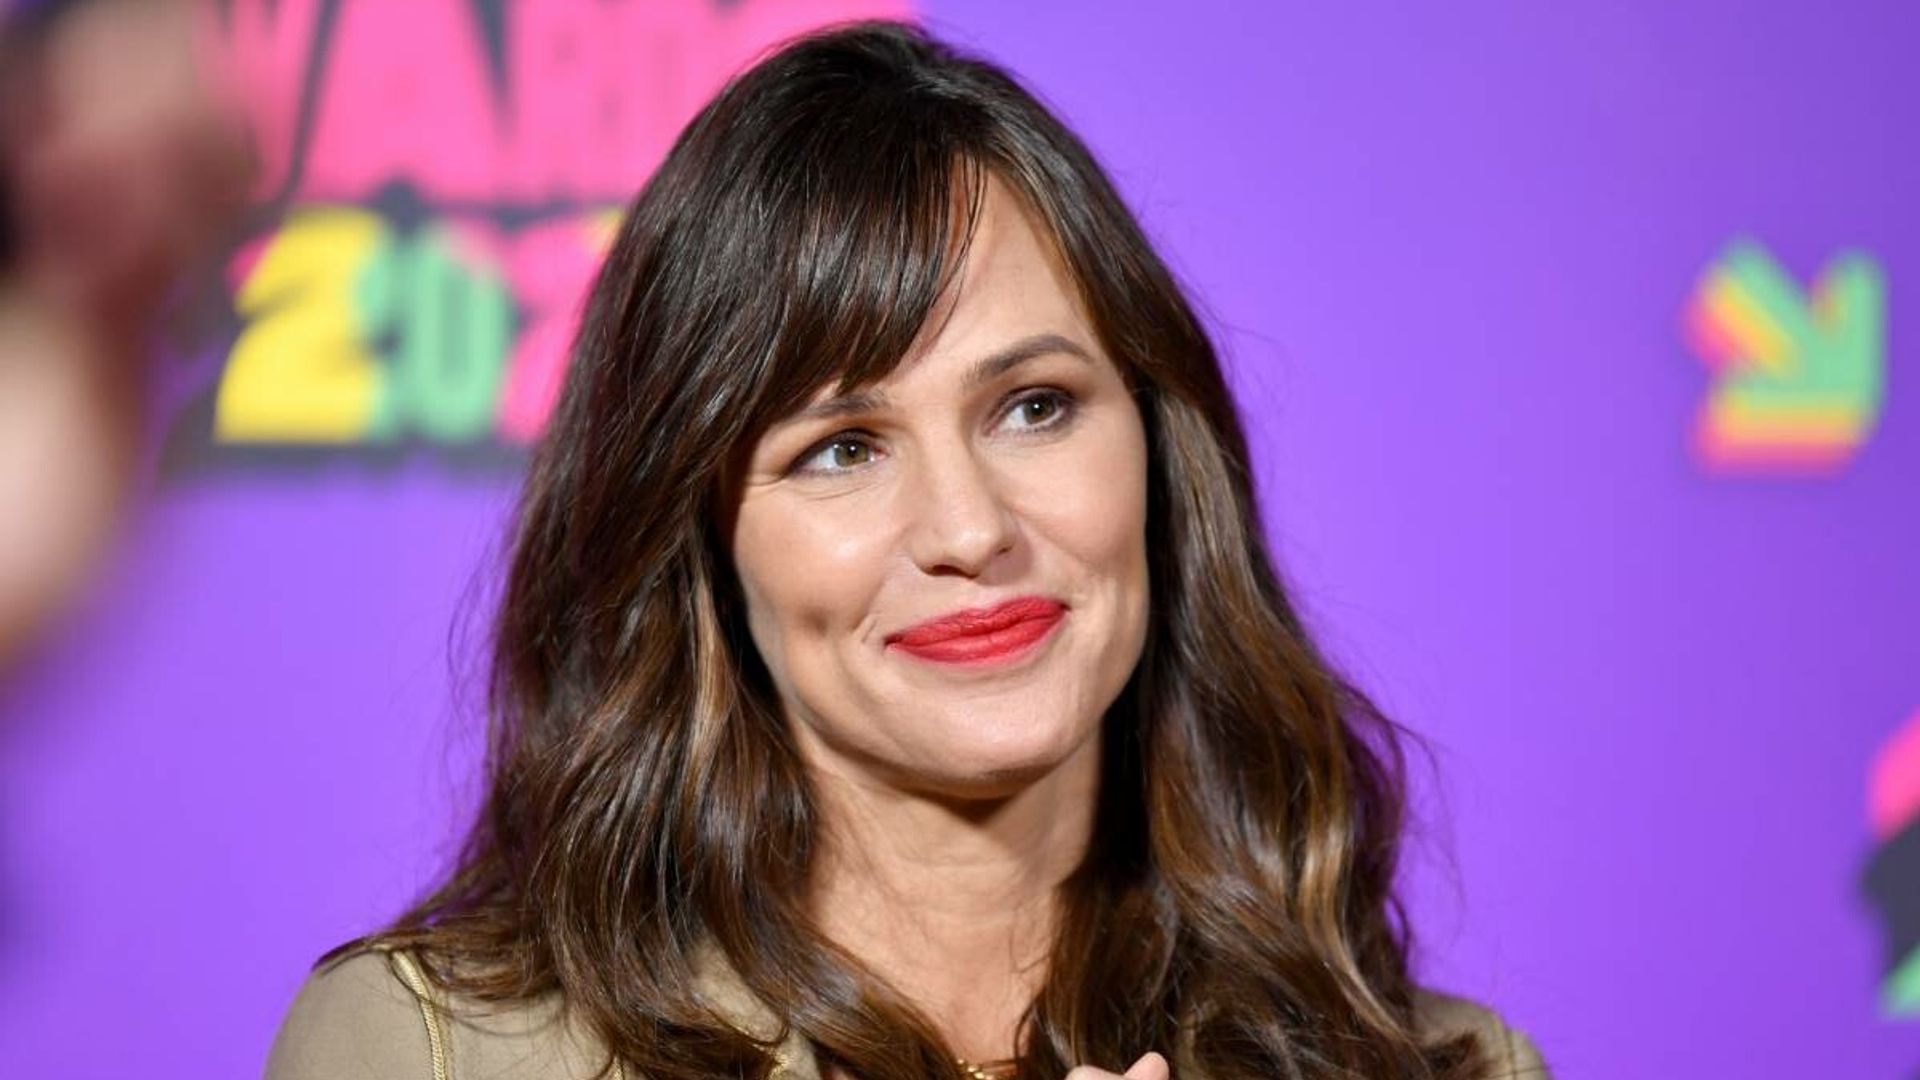 Jennifer Garner stuns in lacy wedding dress – but it's not what you think